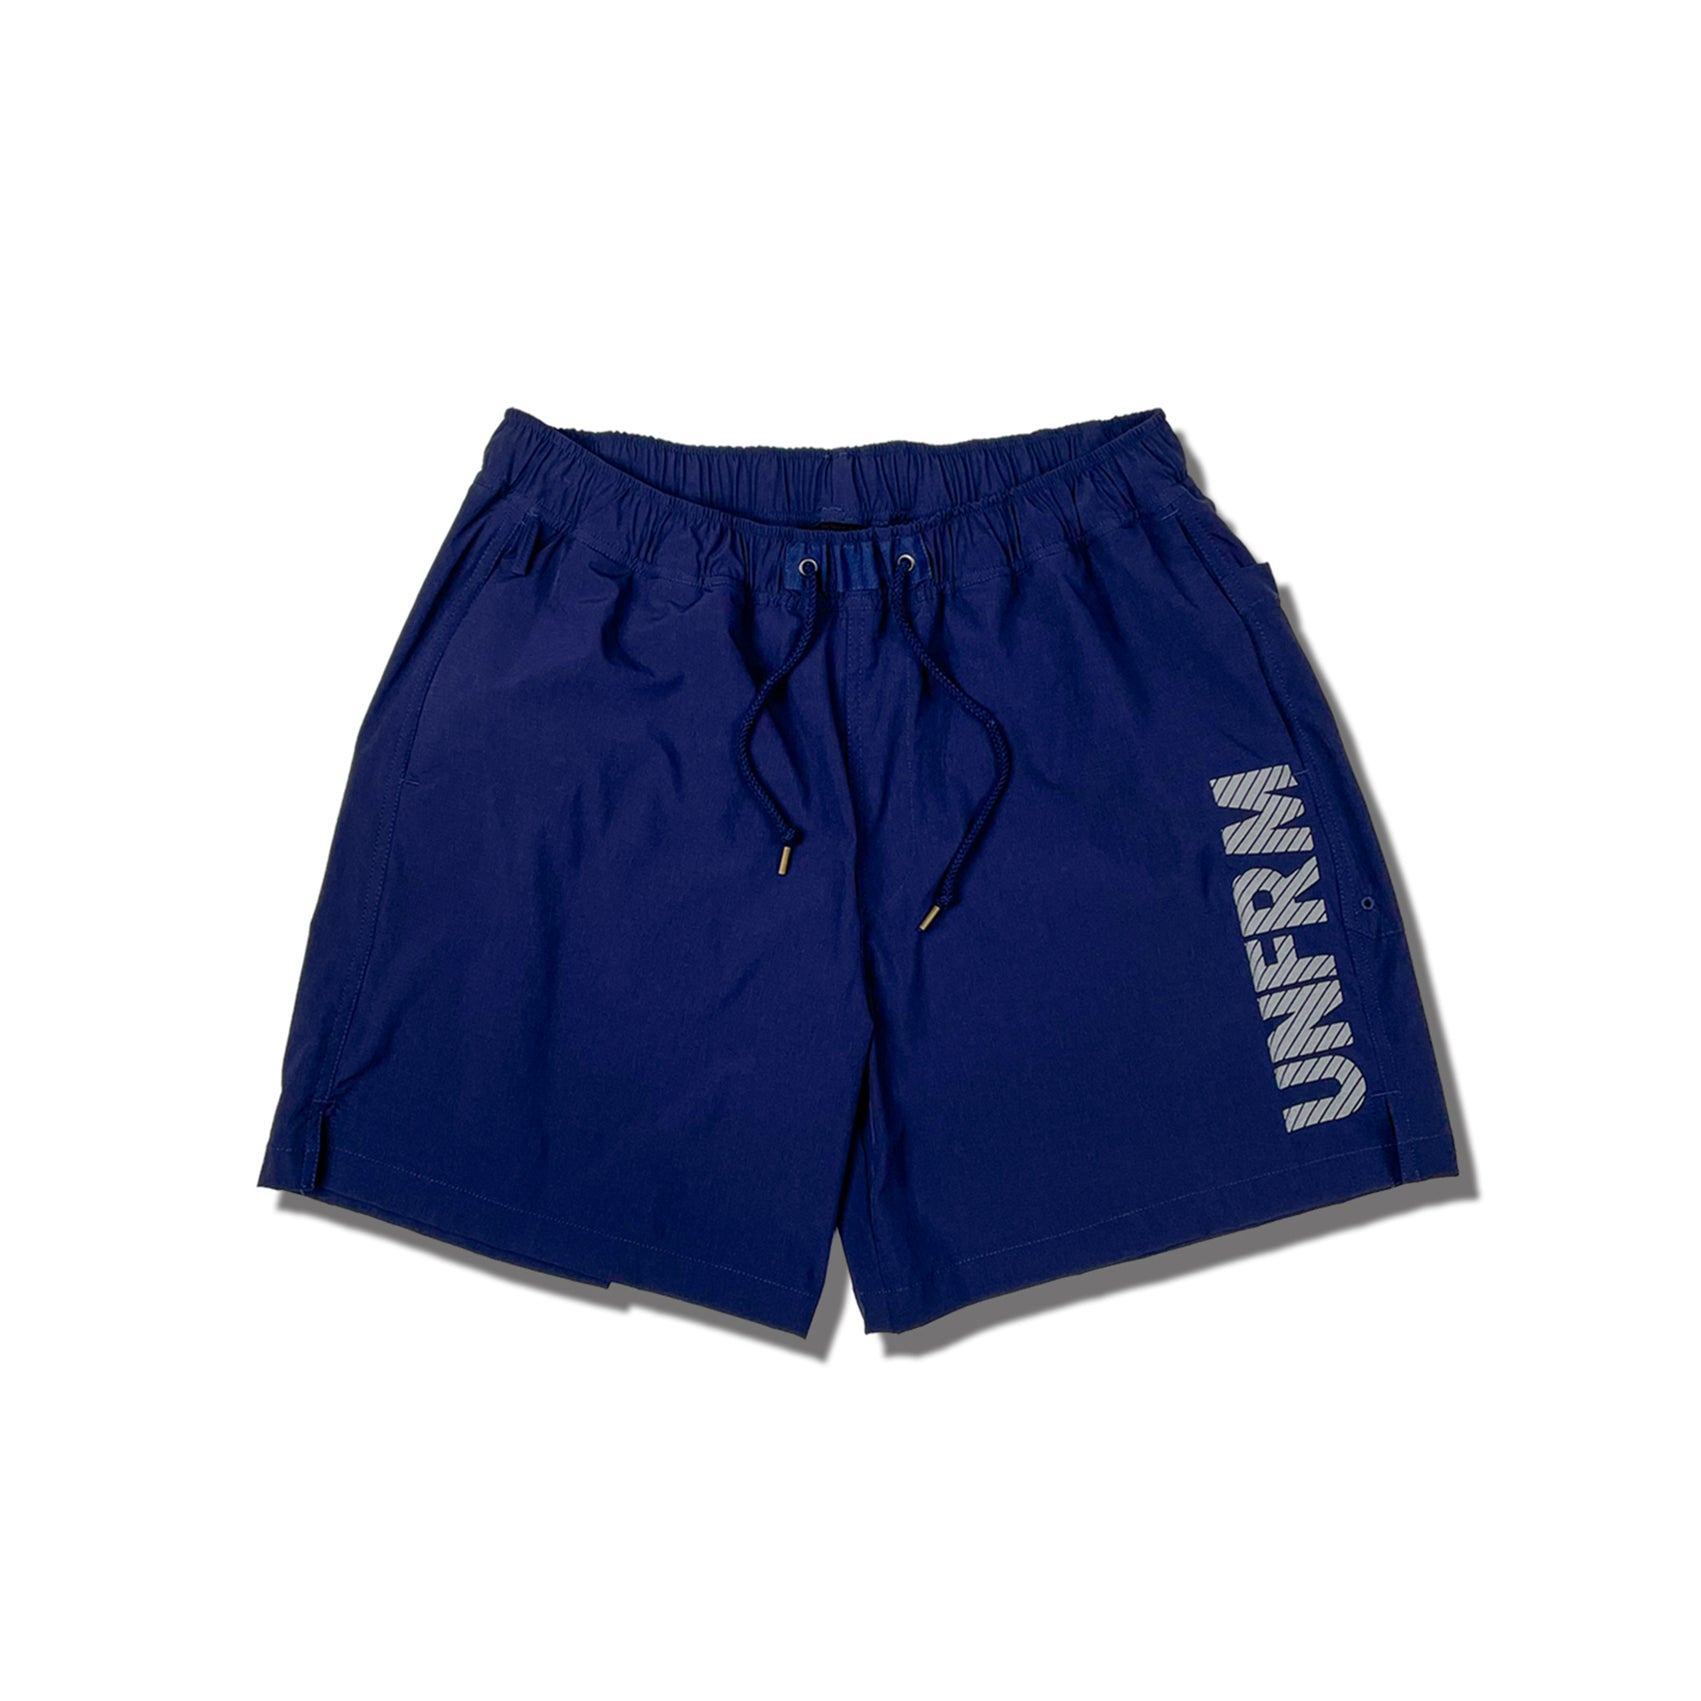 US NAVY 2WAY STRETCH BAGGY SHORTS